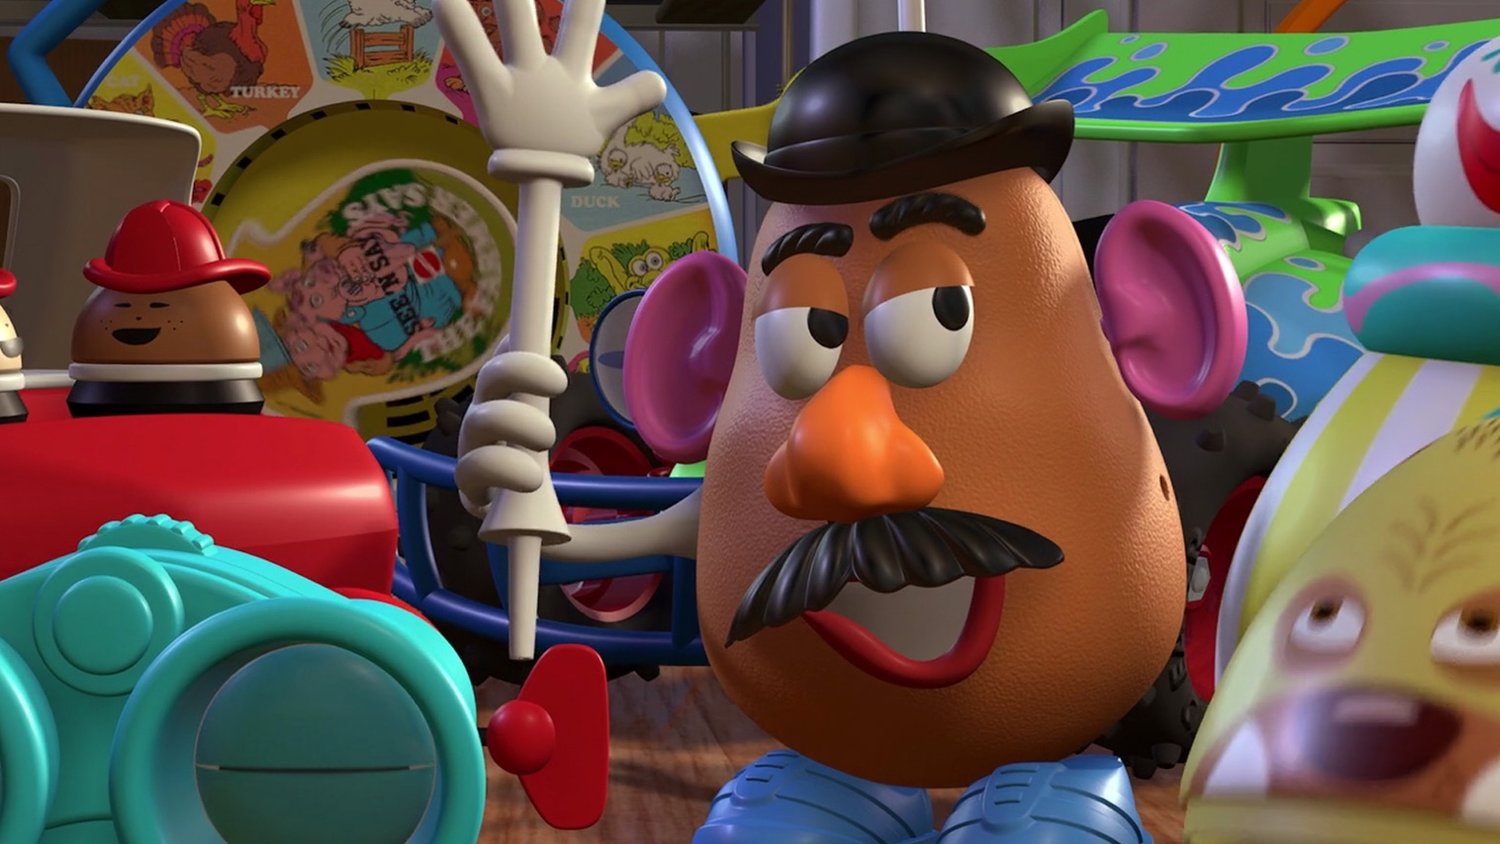 The Late Don Rickles Will Still Voice Mr. Potato Head in TOY STORY 4